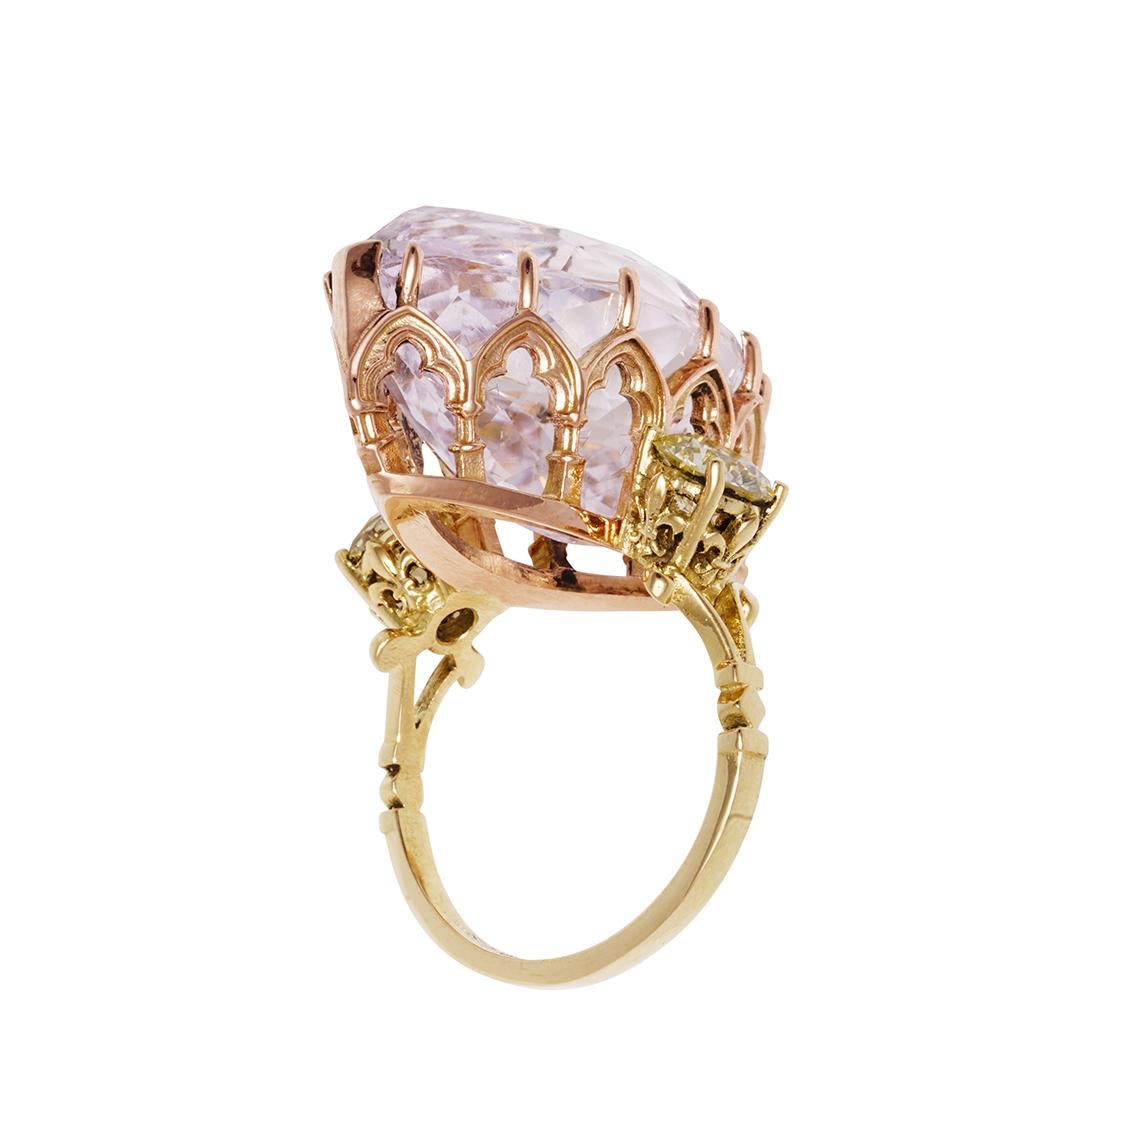 This vibrant ring is glorious in all its majesty, is one of a kind and suitable for the finest enchanters. 

Handmade in 18kt yellow and 18kt rose gold the ring features an enormous, marquise cut, morganite, claw set, approximately 20ct in weight